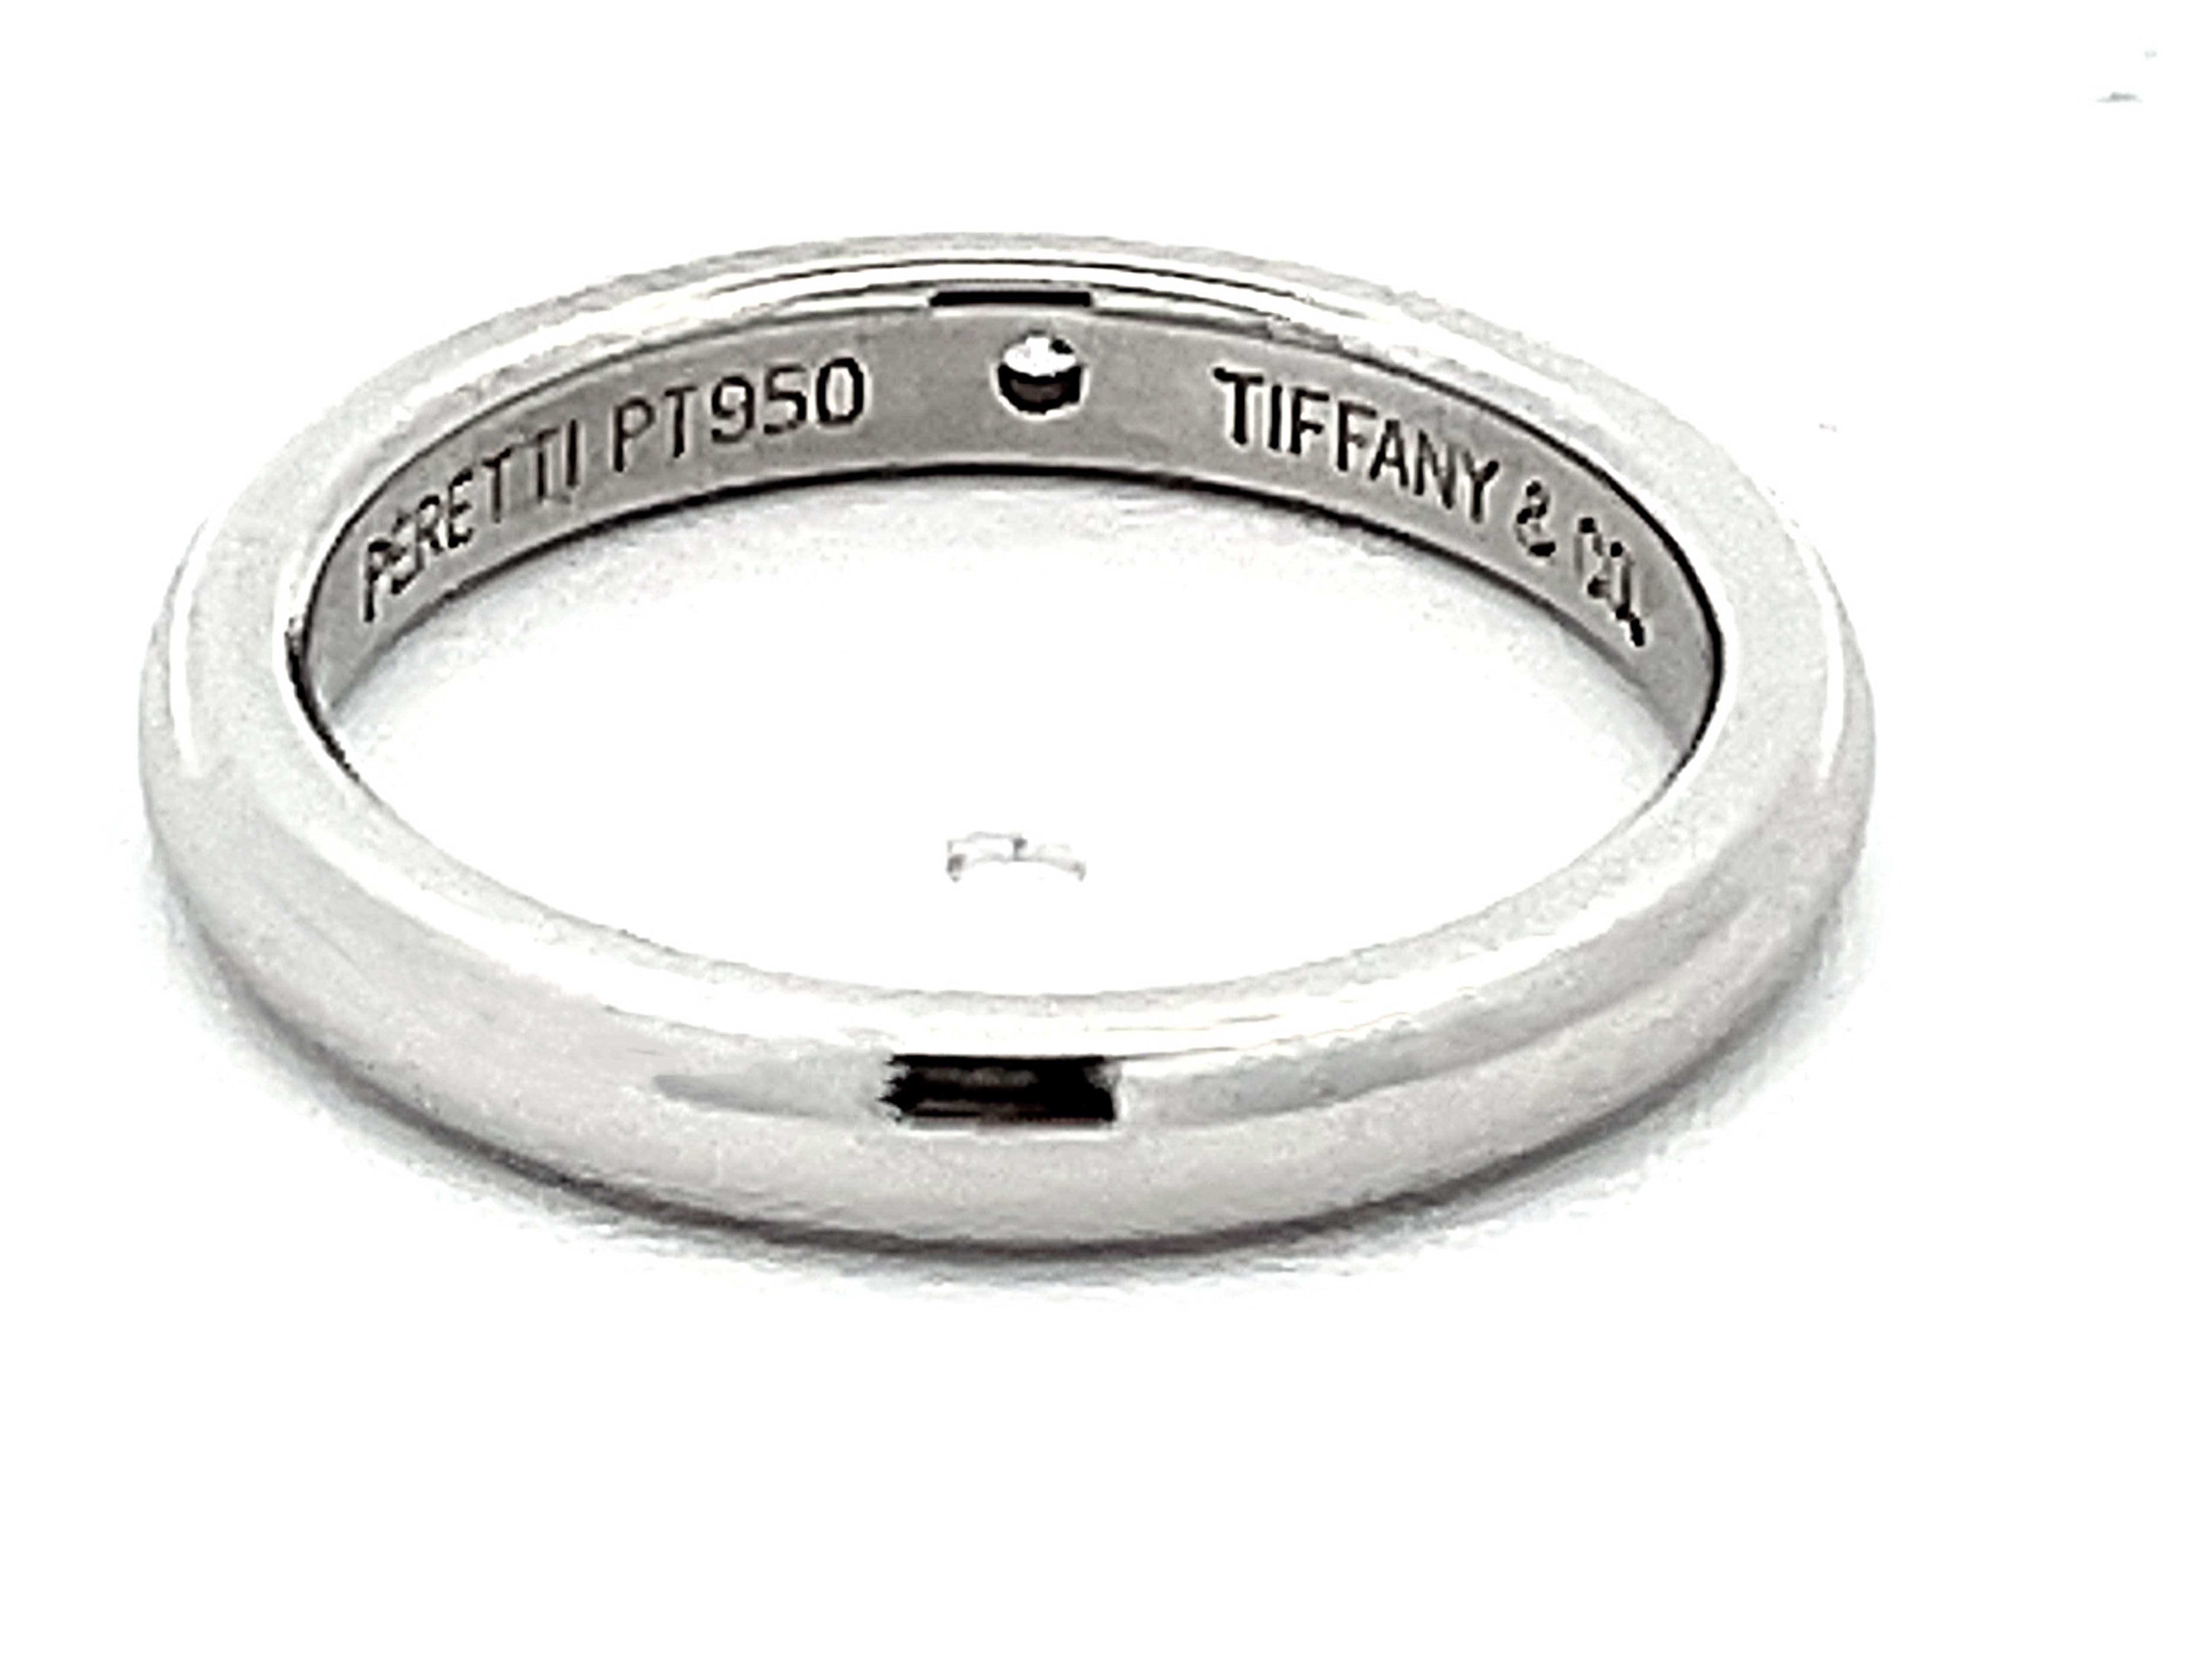 Tiffany & Co. Diamond Wedding Band Ring in Platinum For Sale 1